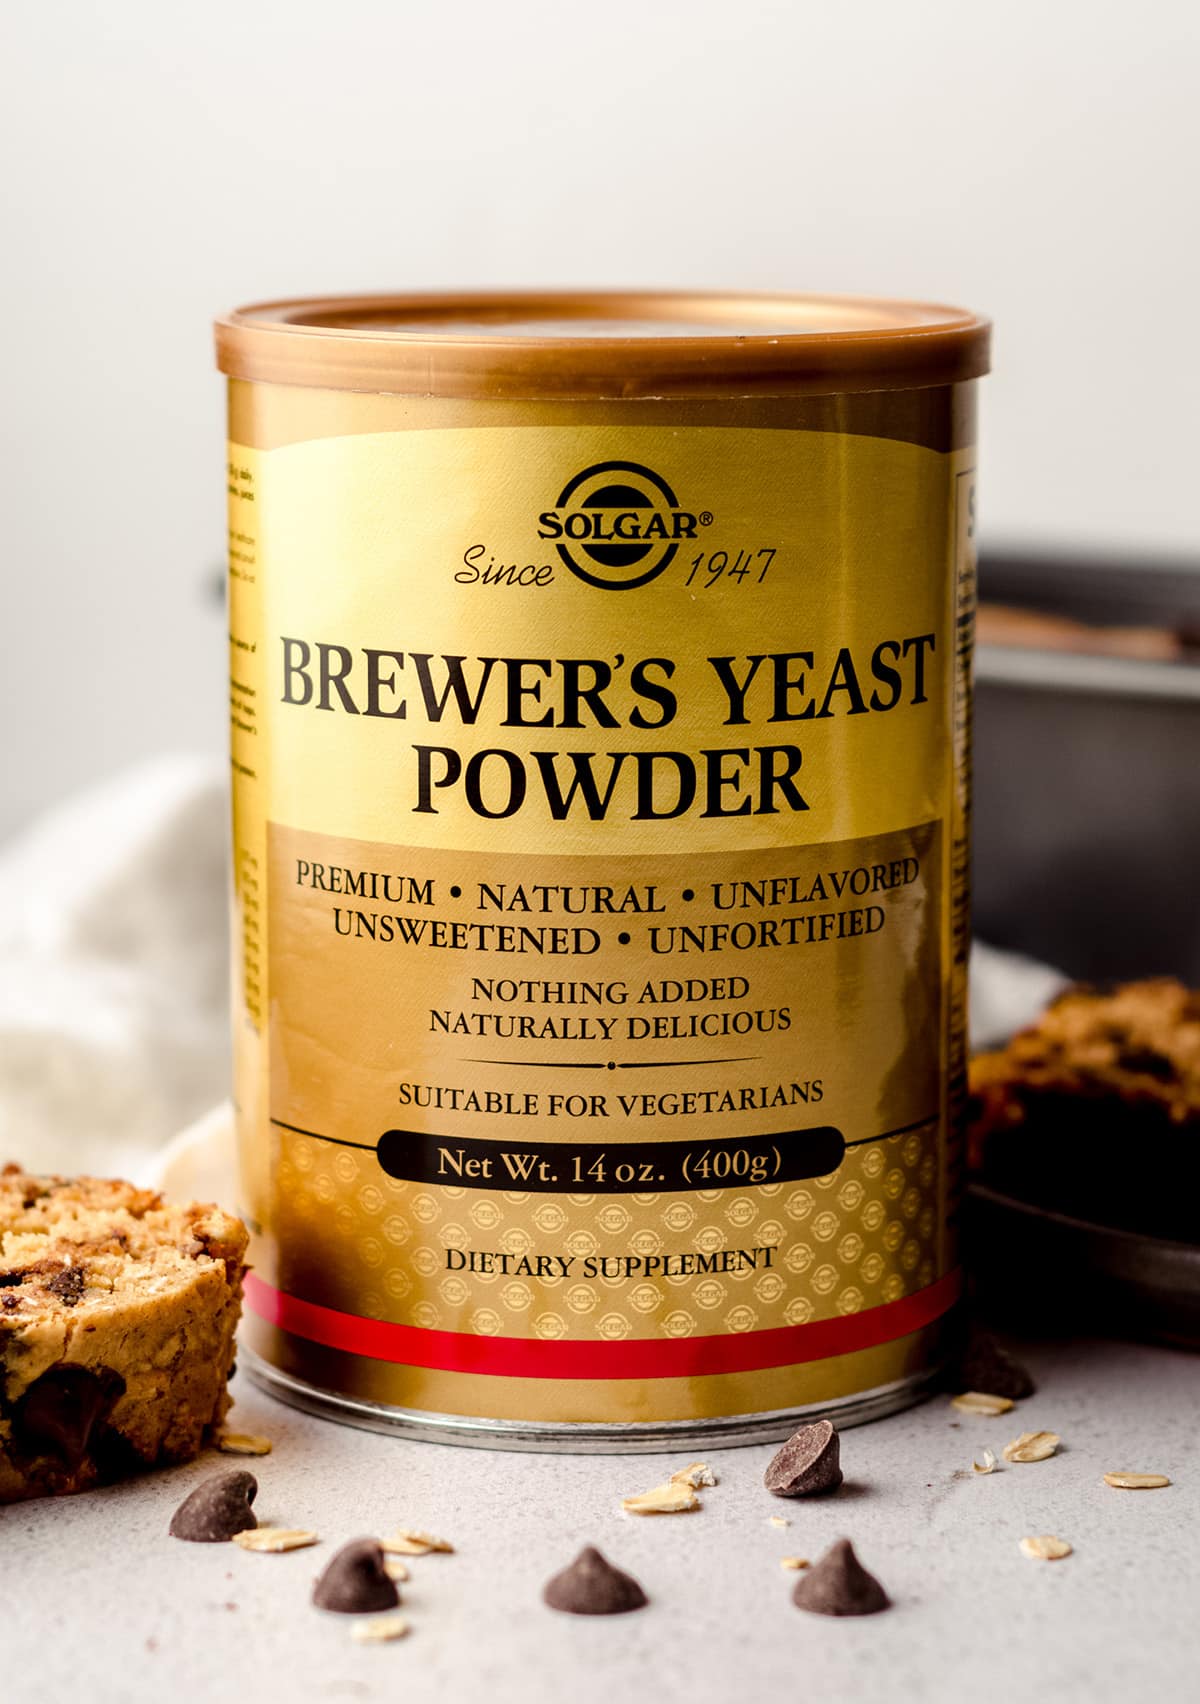 can of brewer's yeast